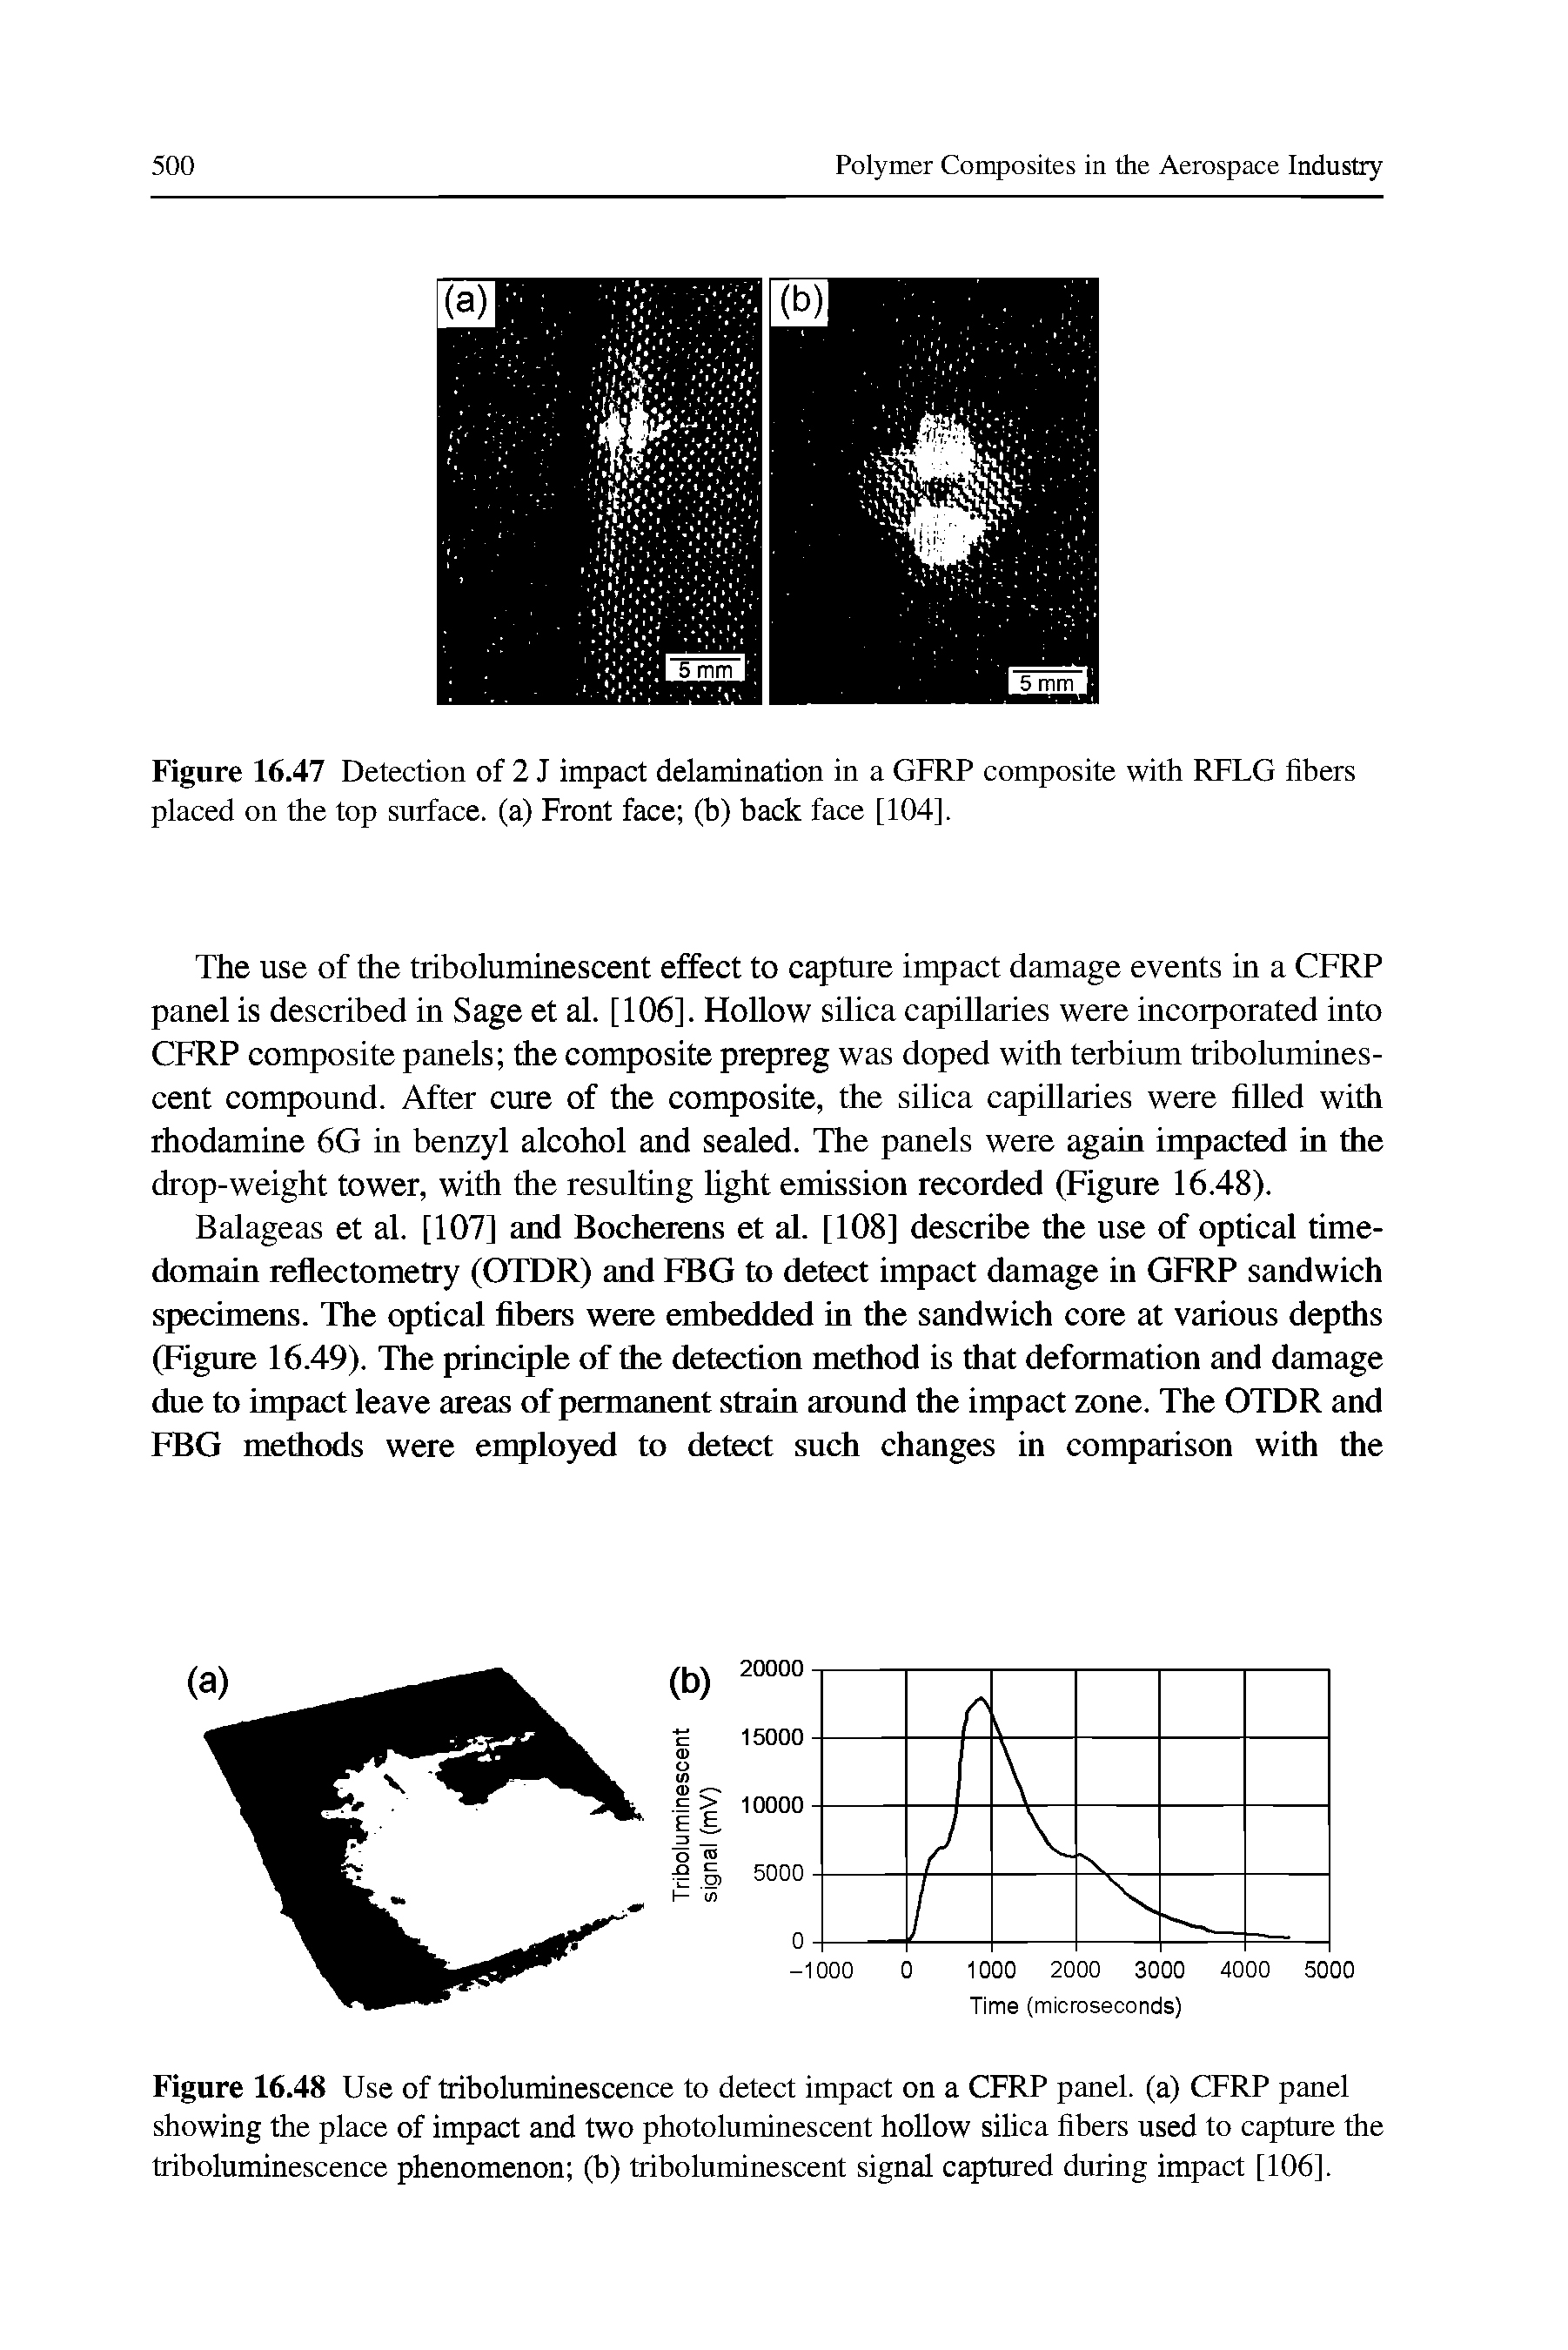 Figure 16.47 Detection of 2 J impact delamination in a GFRP composite with RFLG fibers placed on the top surface, (a) Front face (b) back face [104].